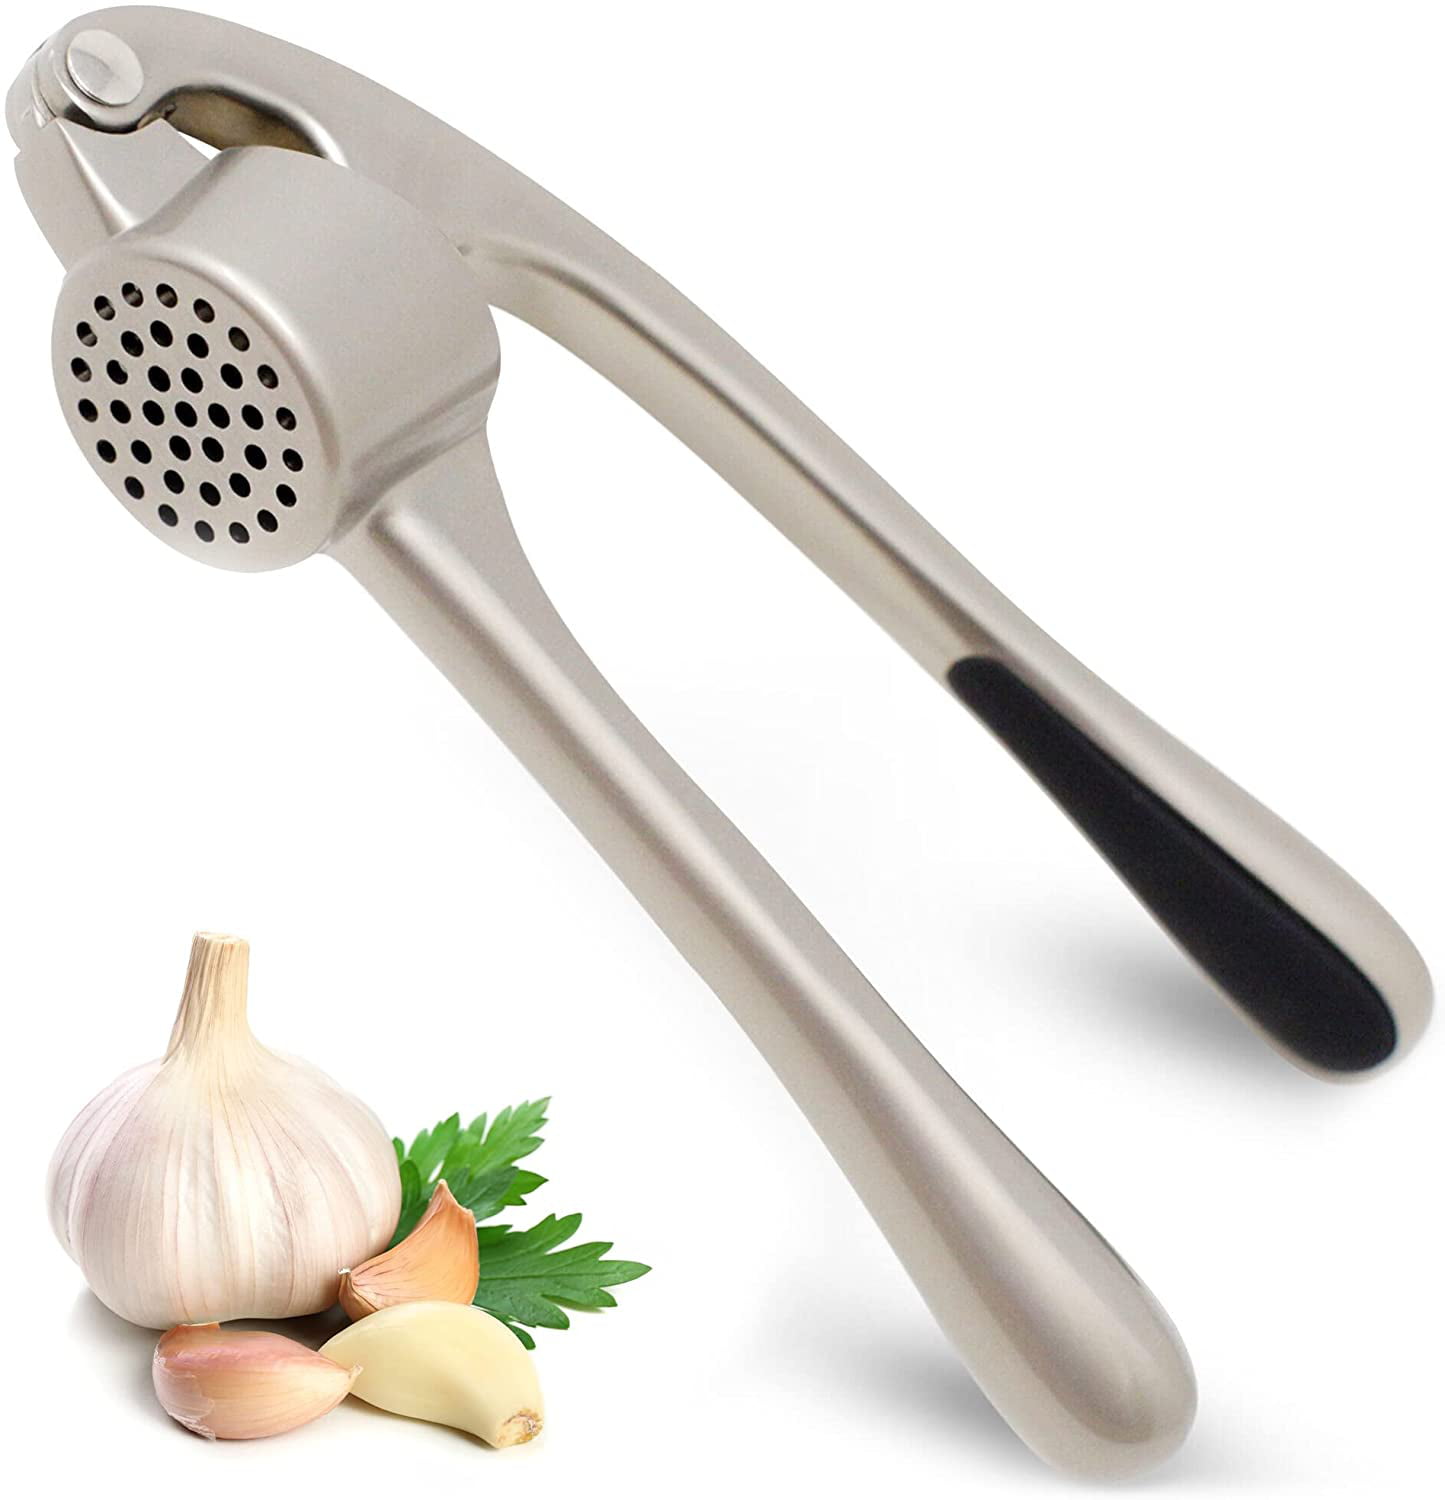 Garlic Crusher for Nuts & Seeds Sturdy Design Extracts More Garlic Paste Per Clove Premium Garlic Press with Soft Easy-Squeeze Ergonomic Handle Professional Garlic Mincer & Ginger Press